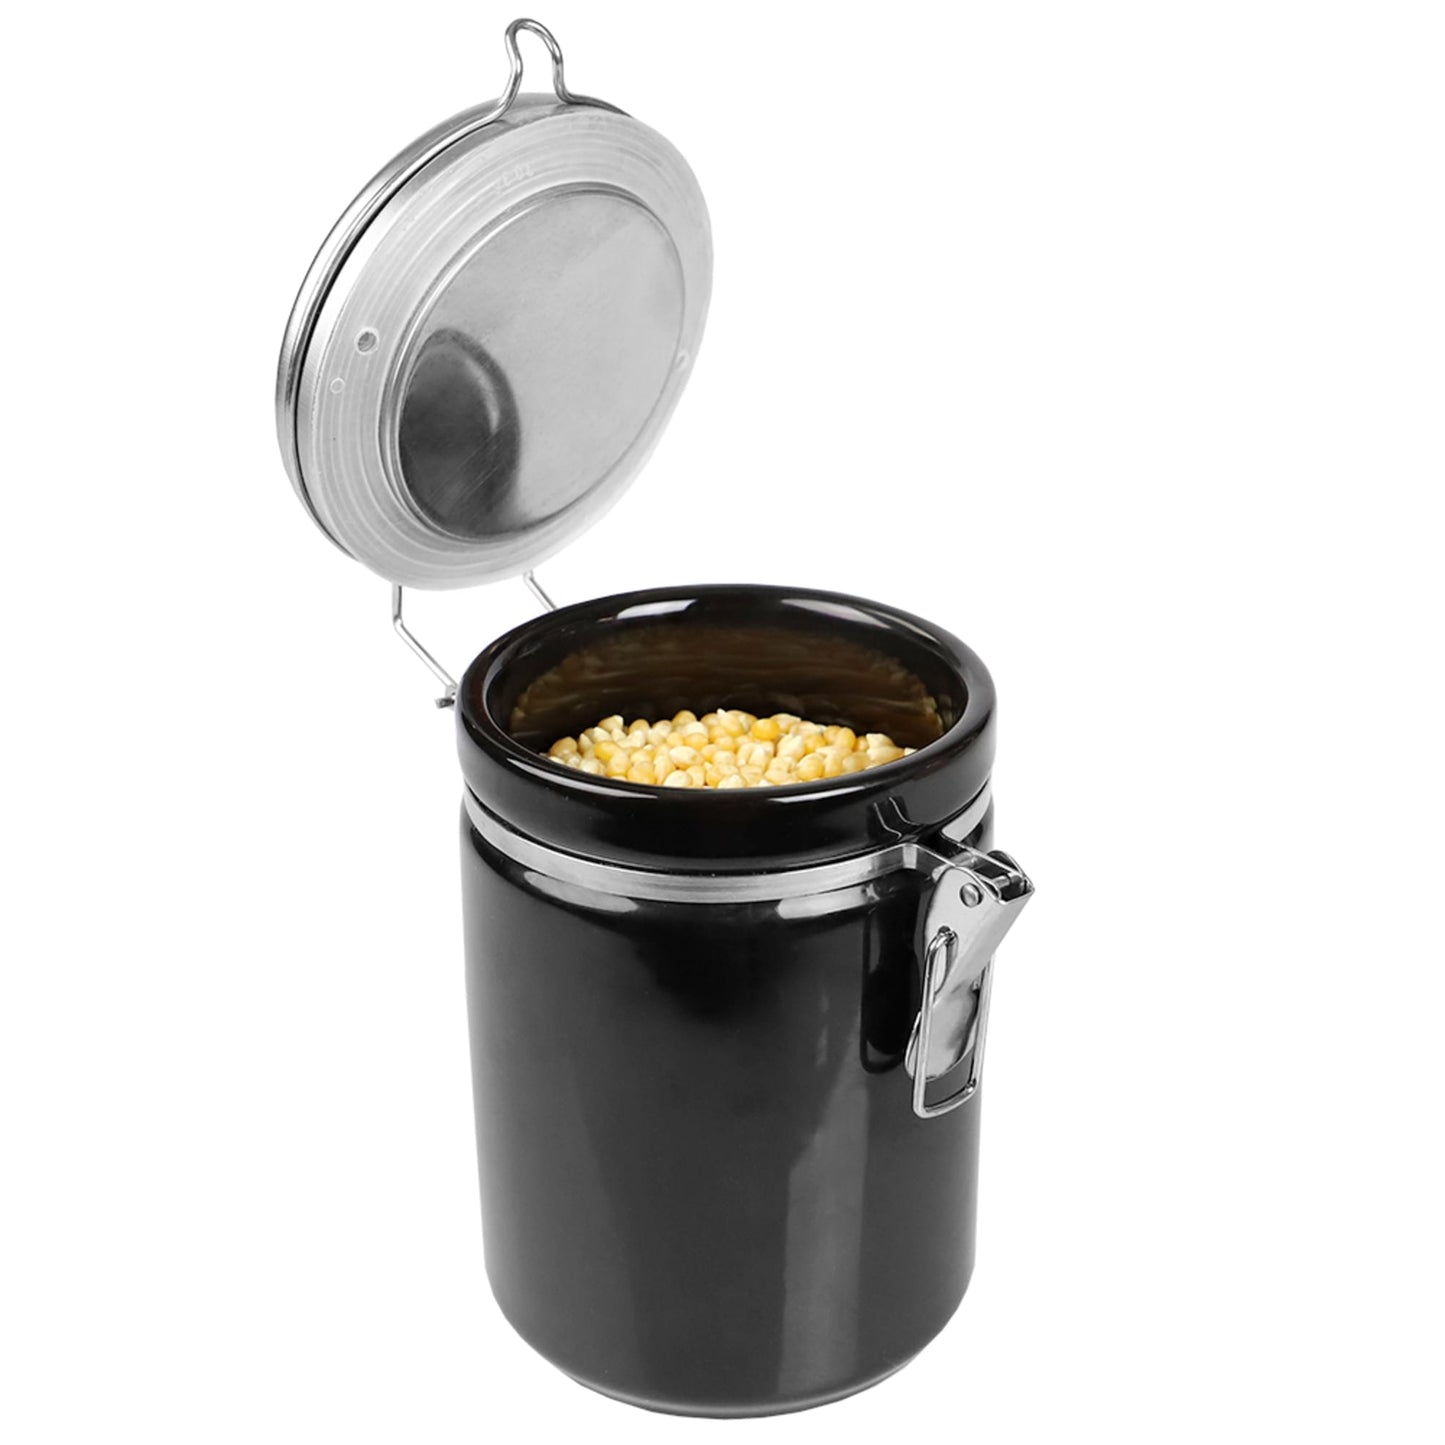 40 oz. Canister with Stainless Steel Top, Black